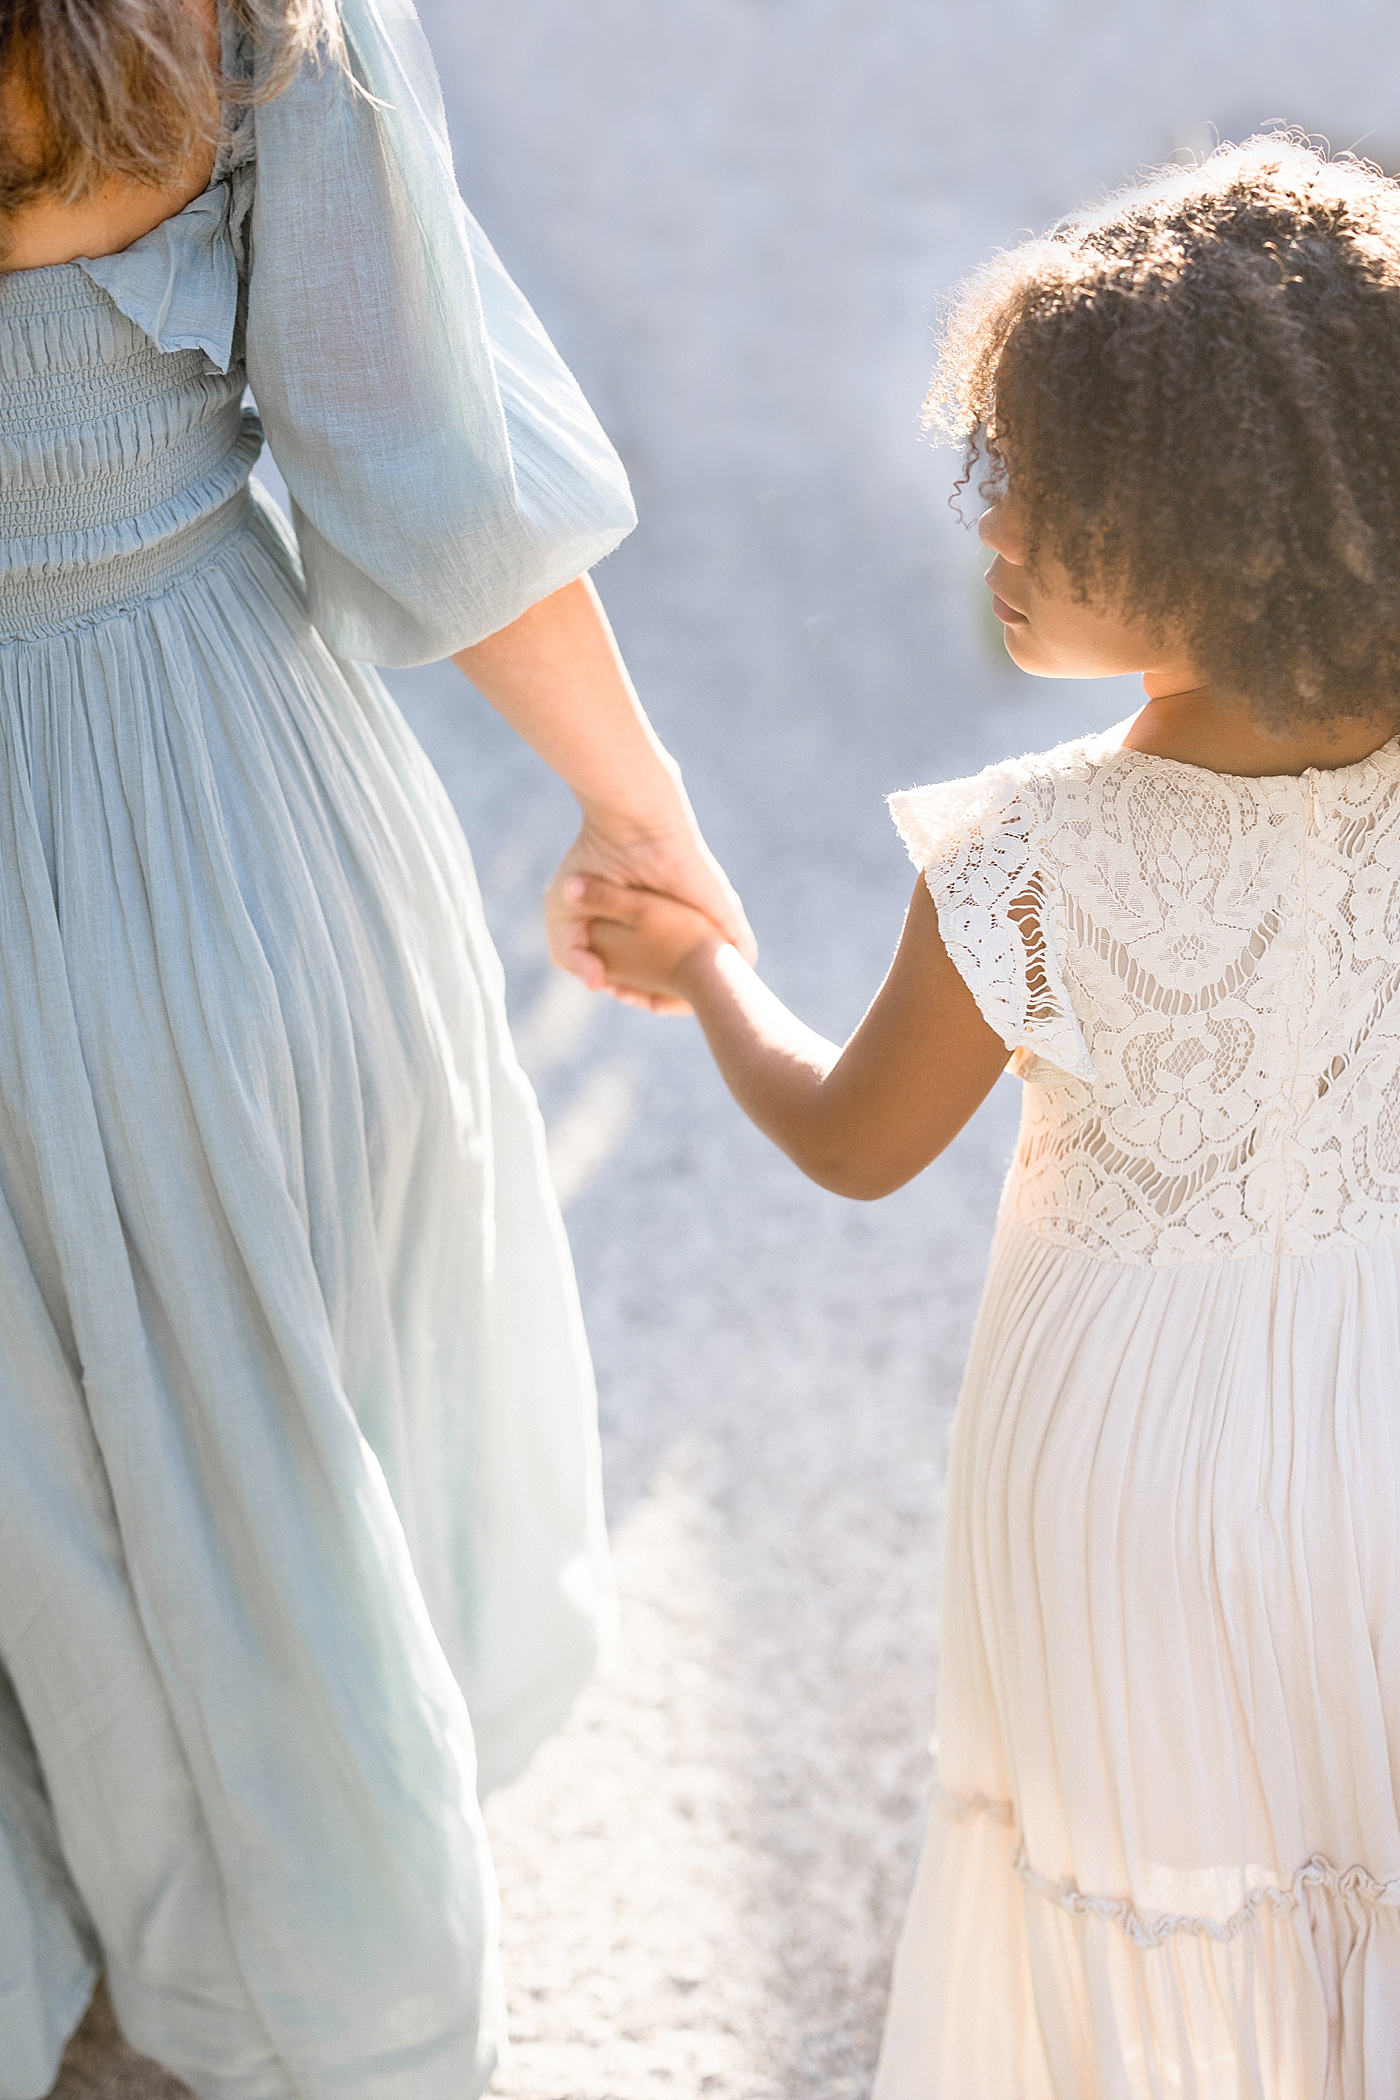 Mom and daughter walking and holding hands. Photo by Brittany Elise Photography.